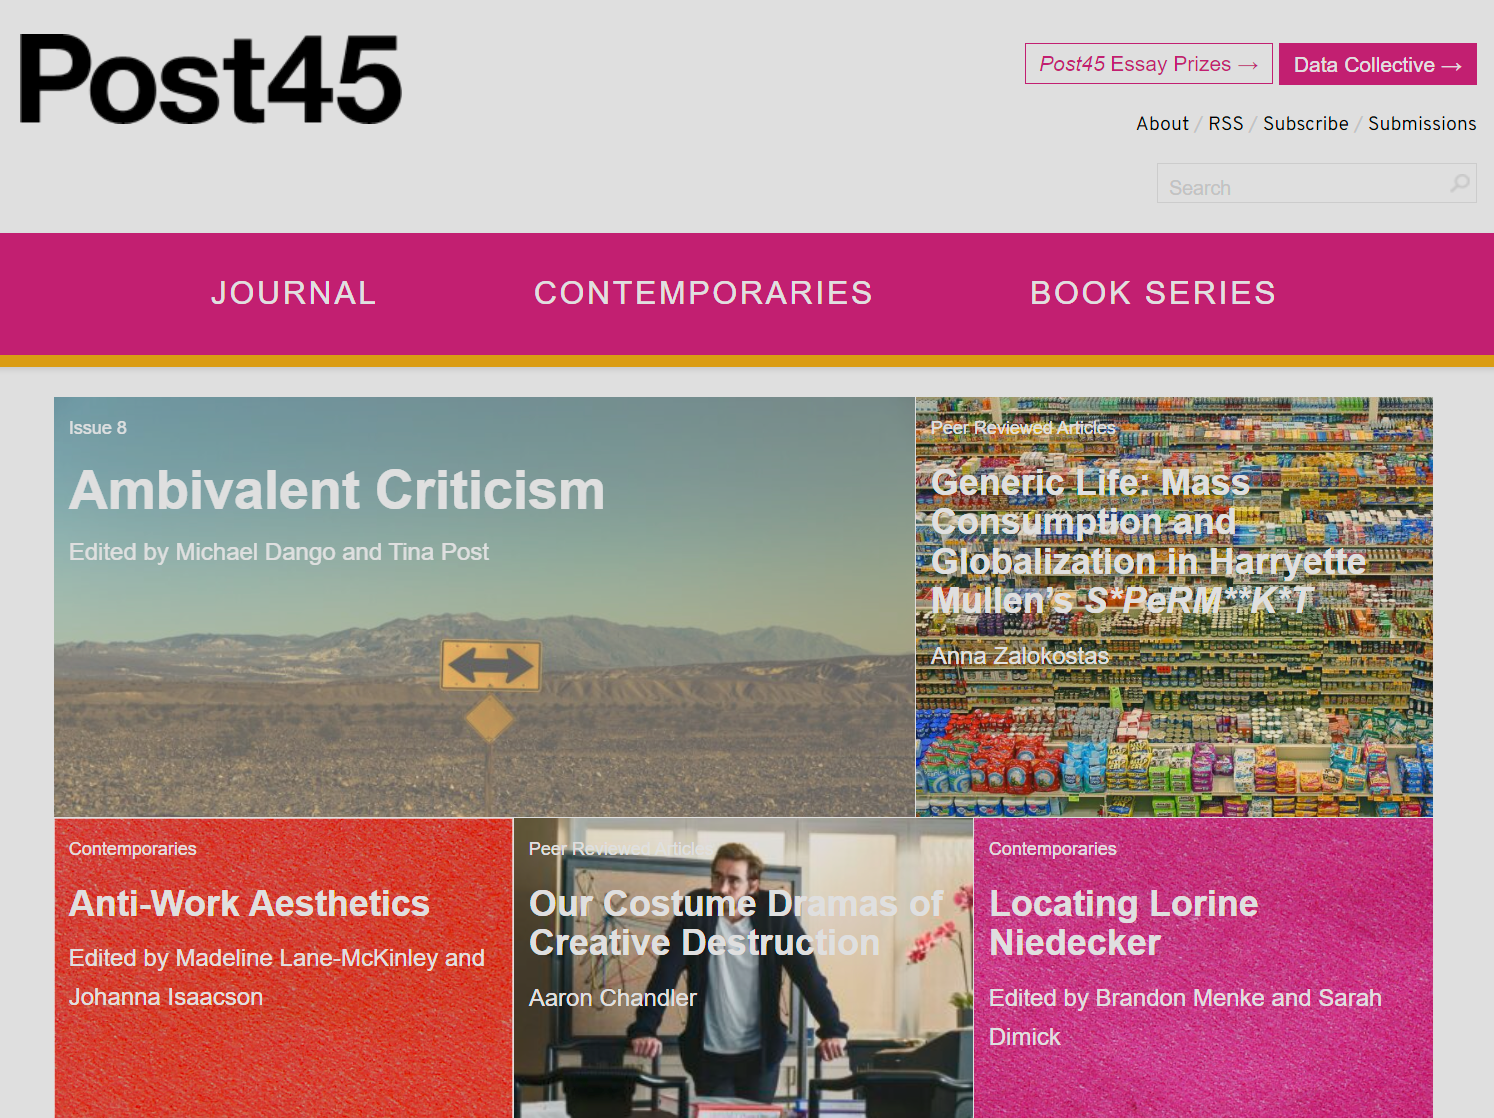 Screenshot of the Post45 home page